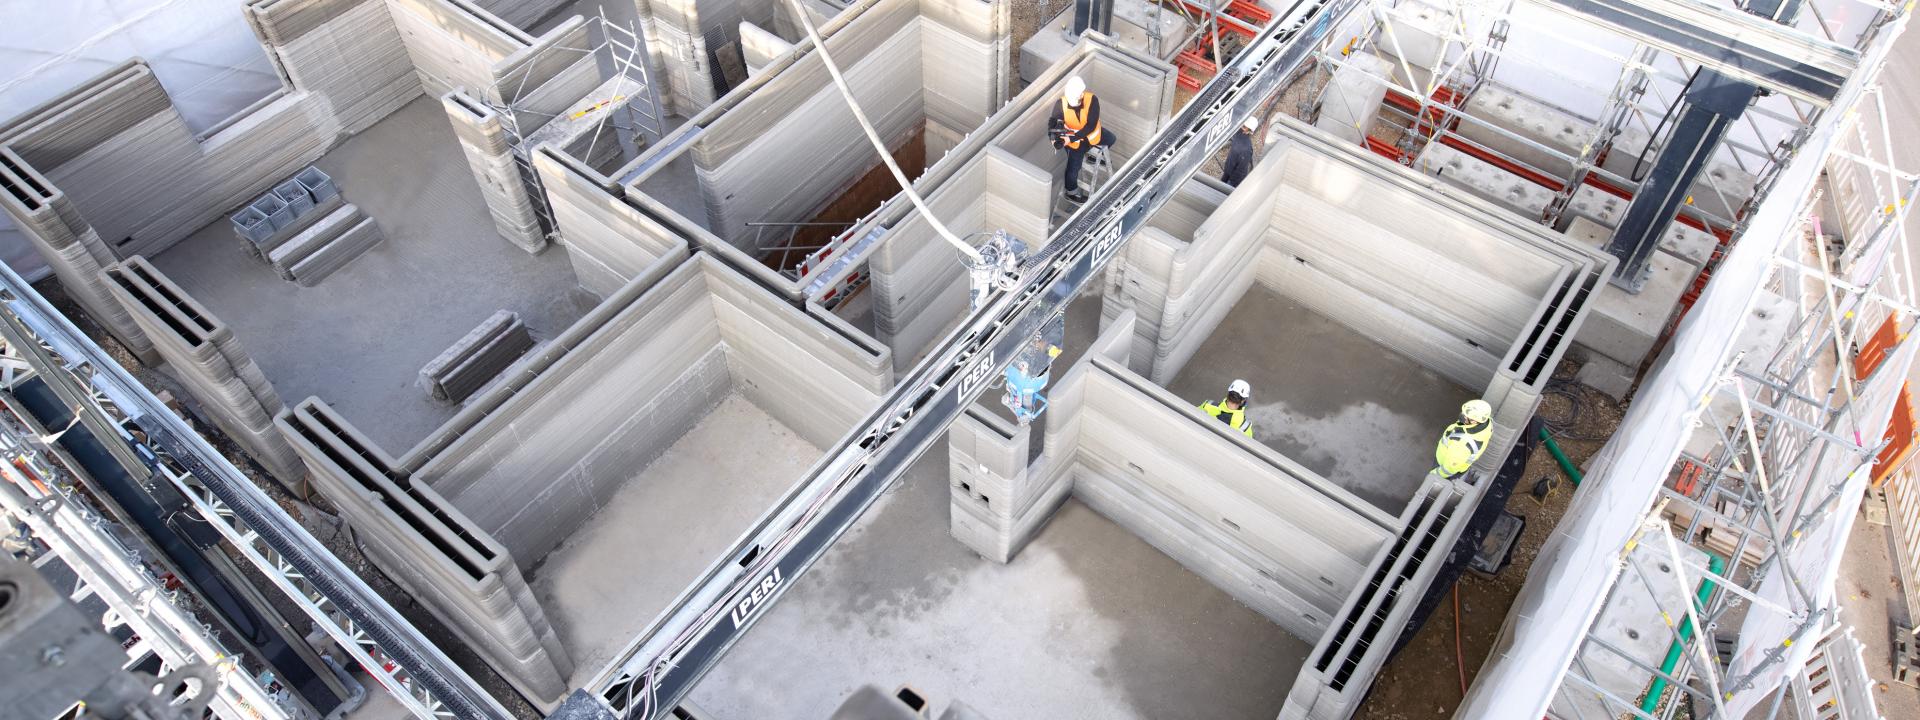 HeidelbergCement delivers 3D printing material for 330 m2 housing block 